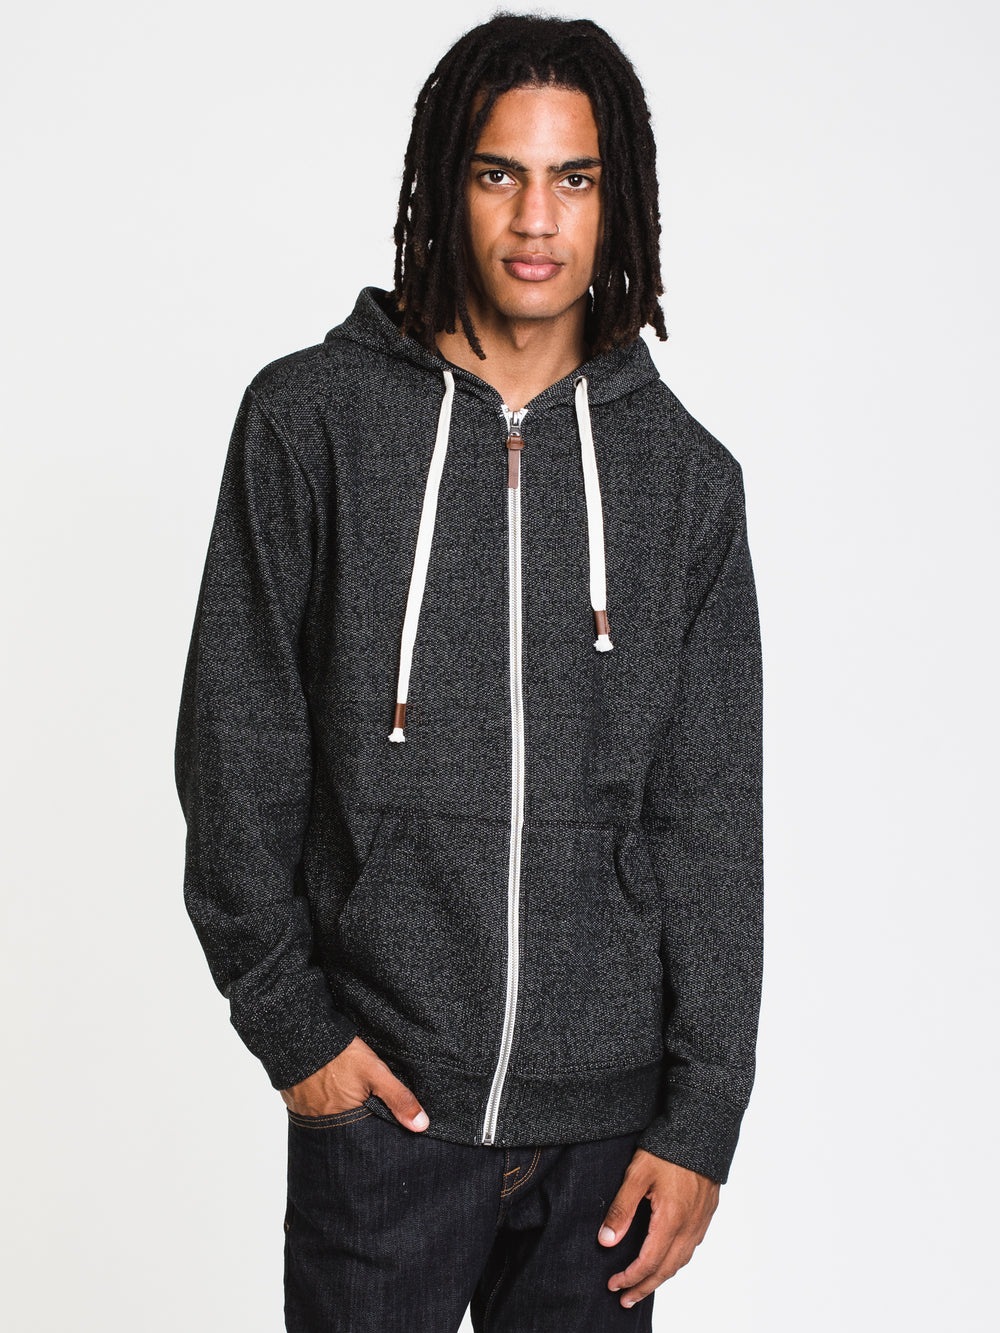 MENS RETRO F/Z HOODIE - CLEARANCE